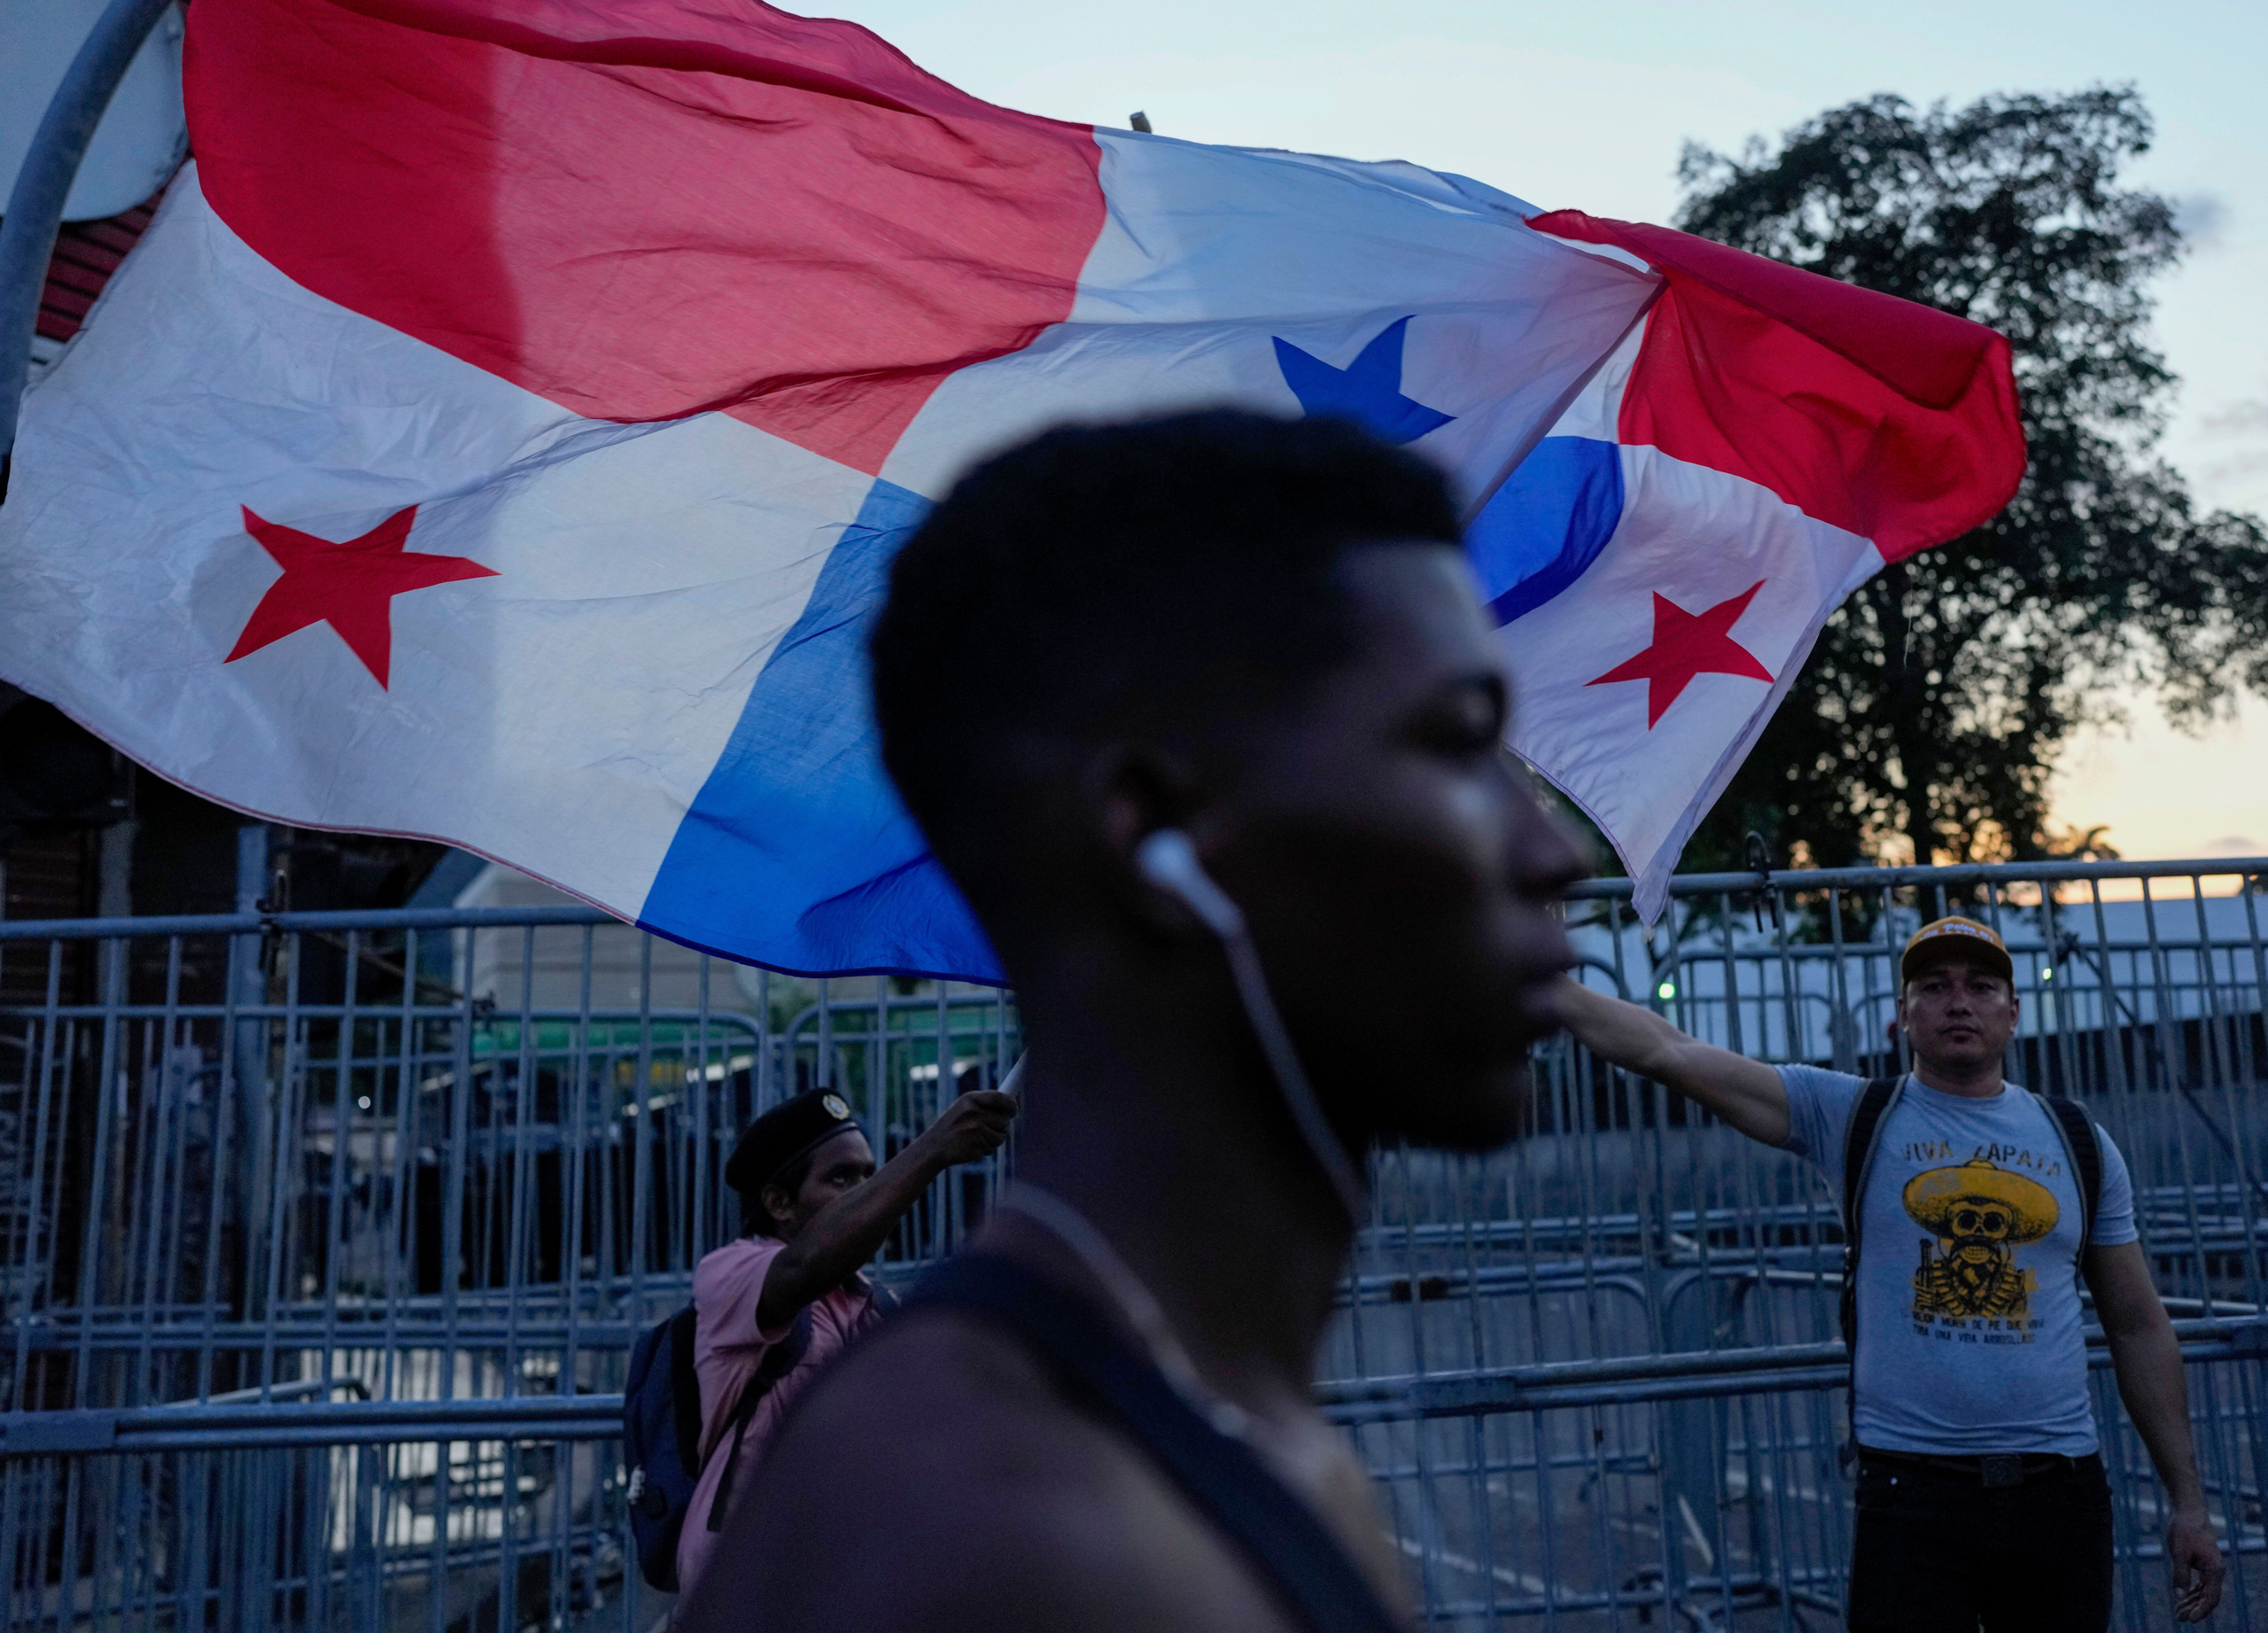 <p>Protests in Panama City against the renewal of a concession for the Cobre Panamá copper mine. After weeks of demonstrations, in November 2023 the contract with Canadian firm First Quantum was declared unconstitutional, and the mine shuttered. (Image: Arnulfo Franco / Alamy)</p>